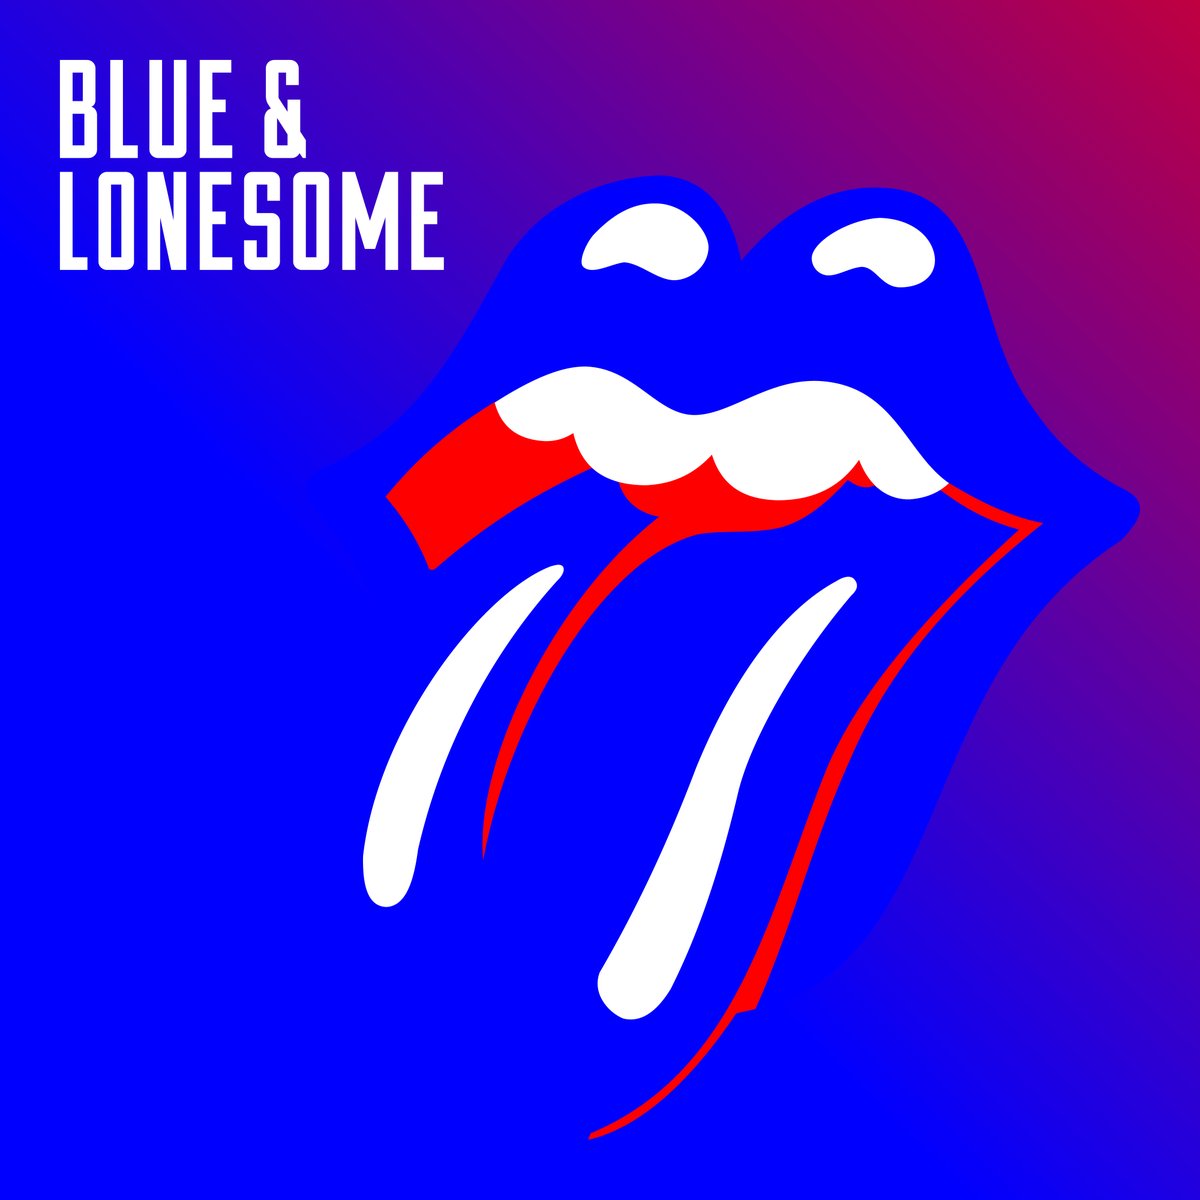 Blue and Lonesome album cover. Photo by: The Rolling Stones